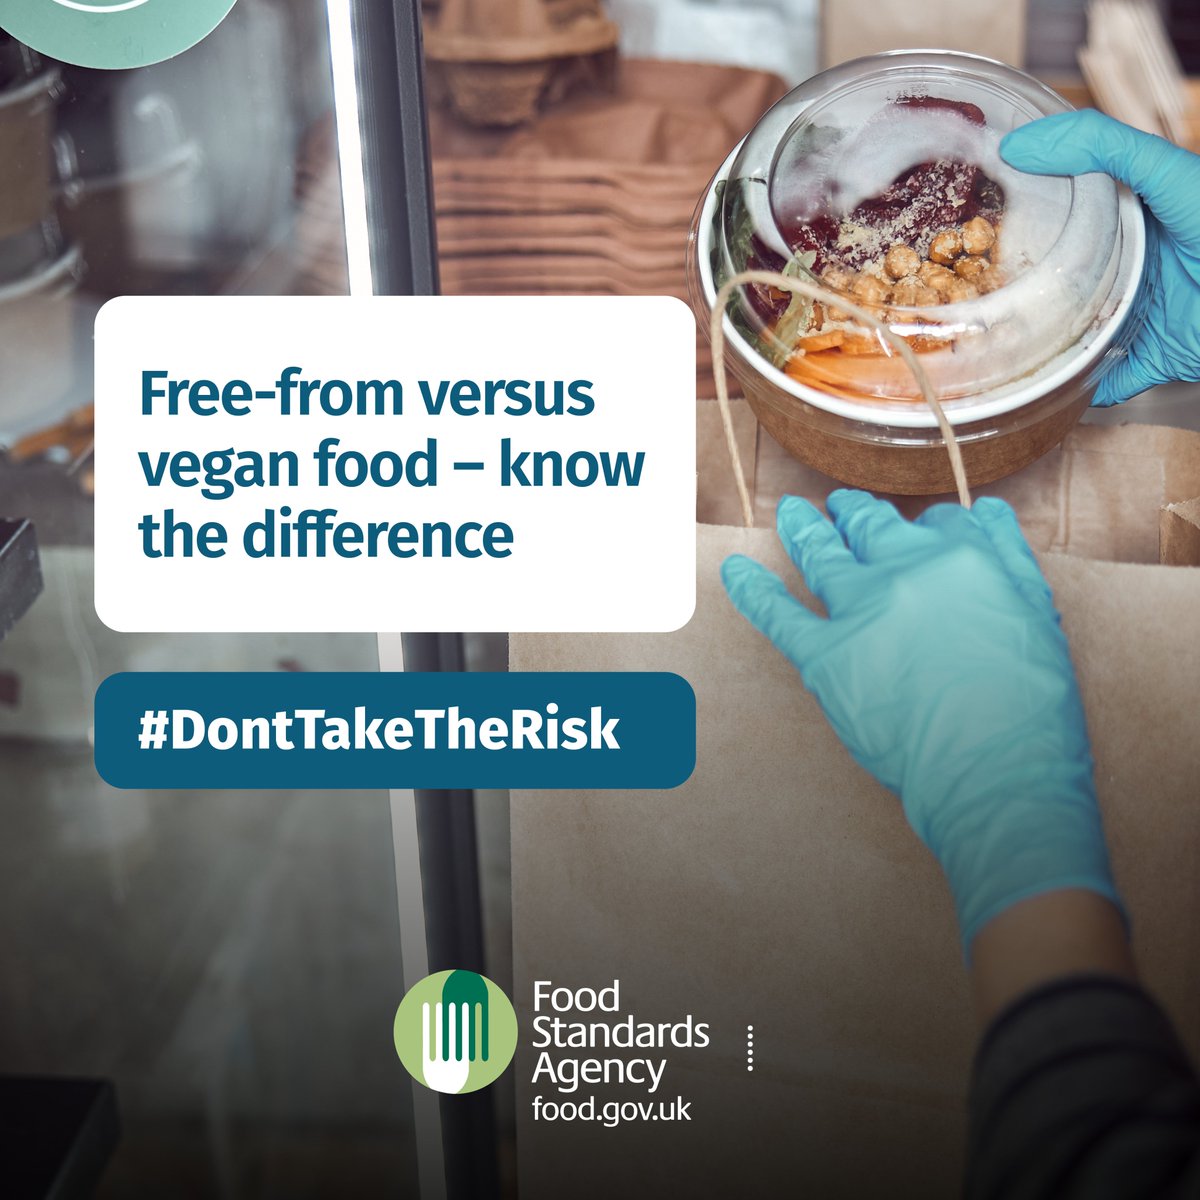 Got an allergy to milk, eggs, crustacea, fish or molluscs? Never assume a product labelled as vegan is safe. Vegan food is at high risk of cross-contamination. So says the FSA #DontTakeTheRisk Use the SFBB+ App to manage your allergens sfbbplus.co.uk